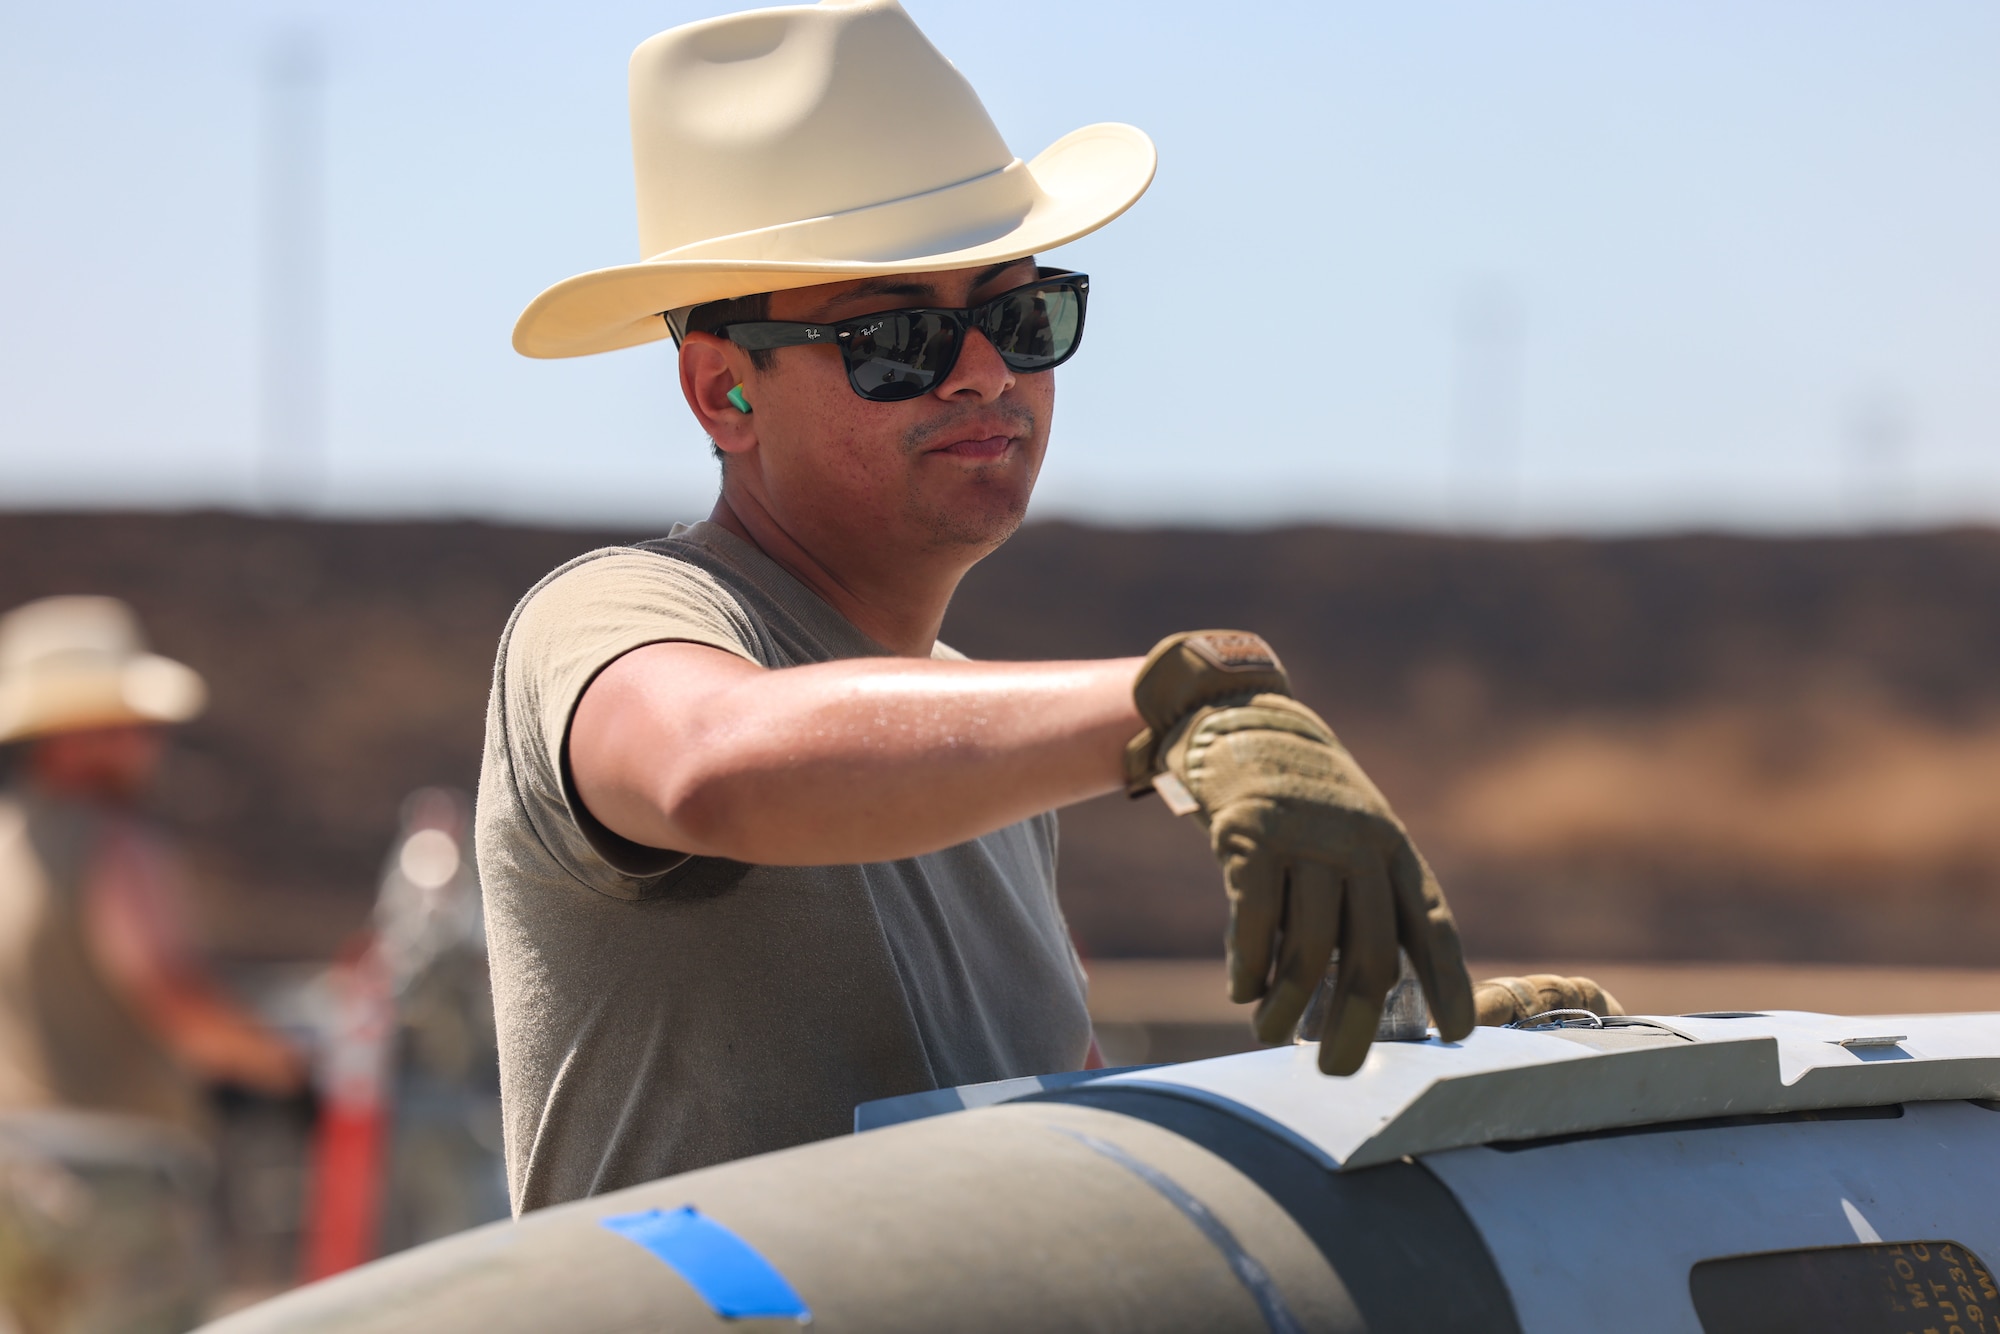 U.S. Air Force Senior Airman Nicolas Gonzales, 56th Equipment Maintenance Squadron stockpile maintenance crew chief, from Luke Air Force Base, Arizona, inspects a bomb on a trailer during the Air Force Combat Operations Competition (AFCOCOMP) on Beale Air Force Base, California, Aug. 24, 2023.